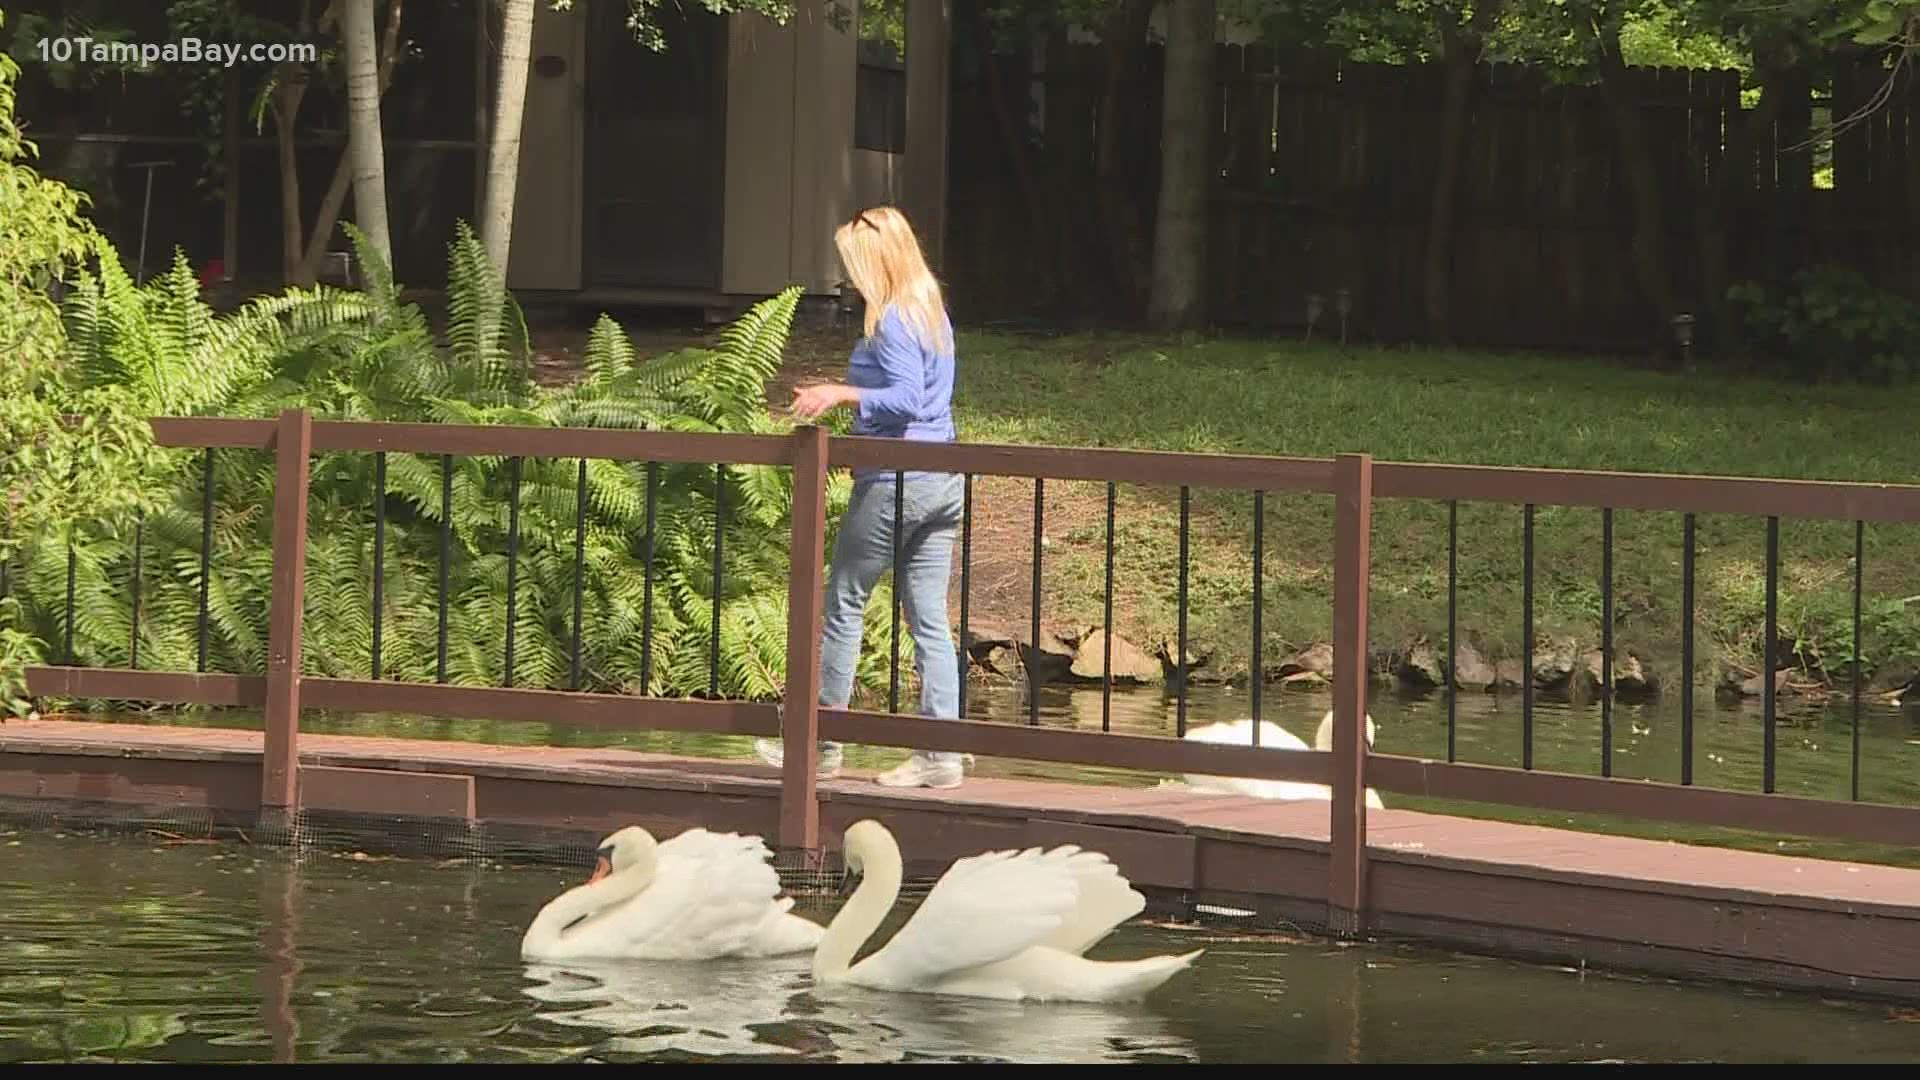 Lakeland is selling swans to keep the $10,000 cost of care under control.